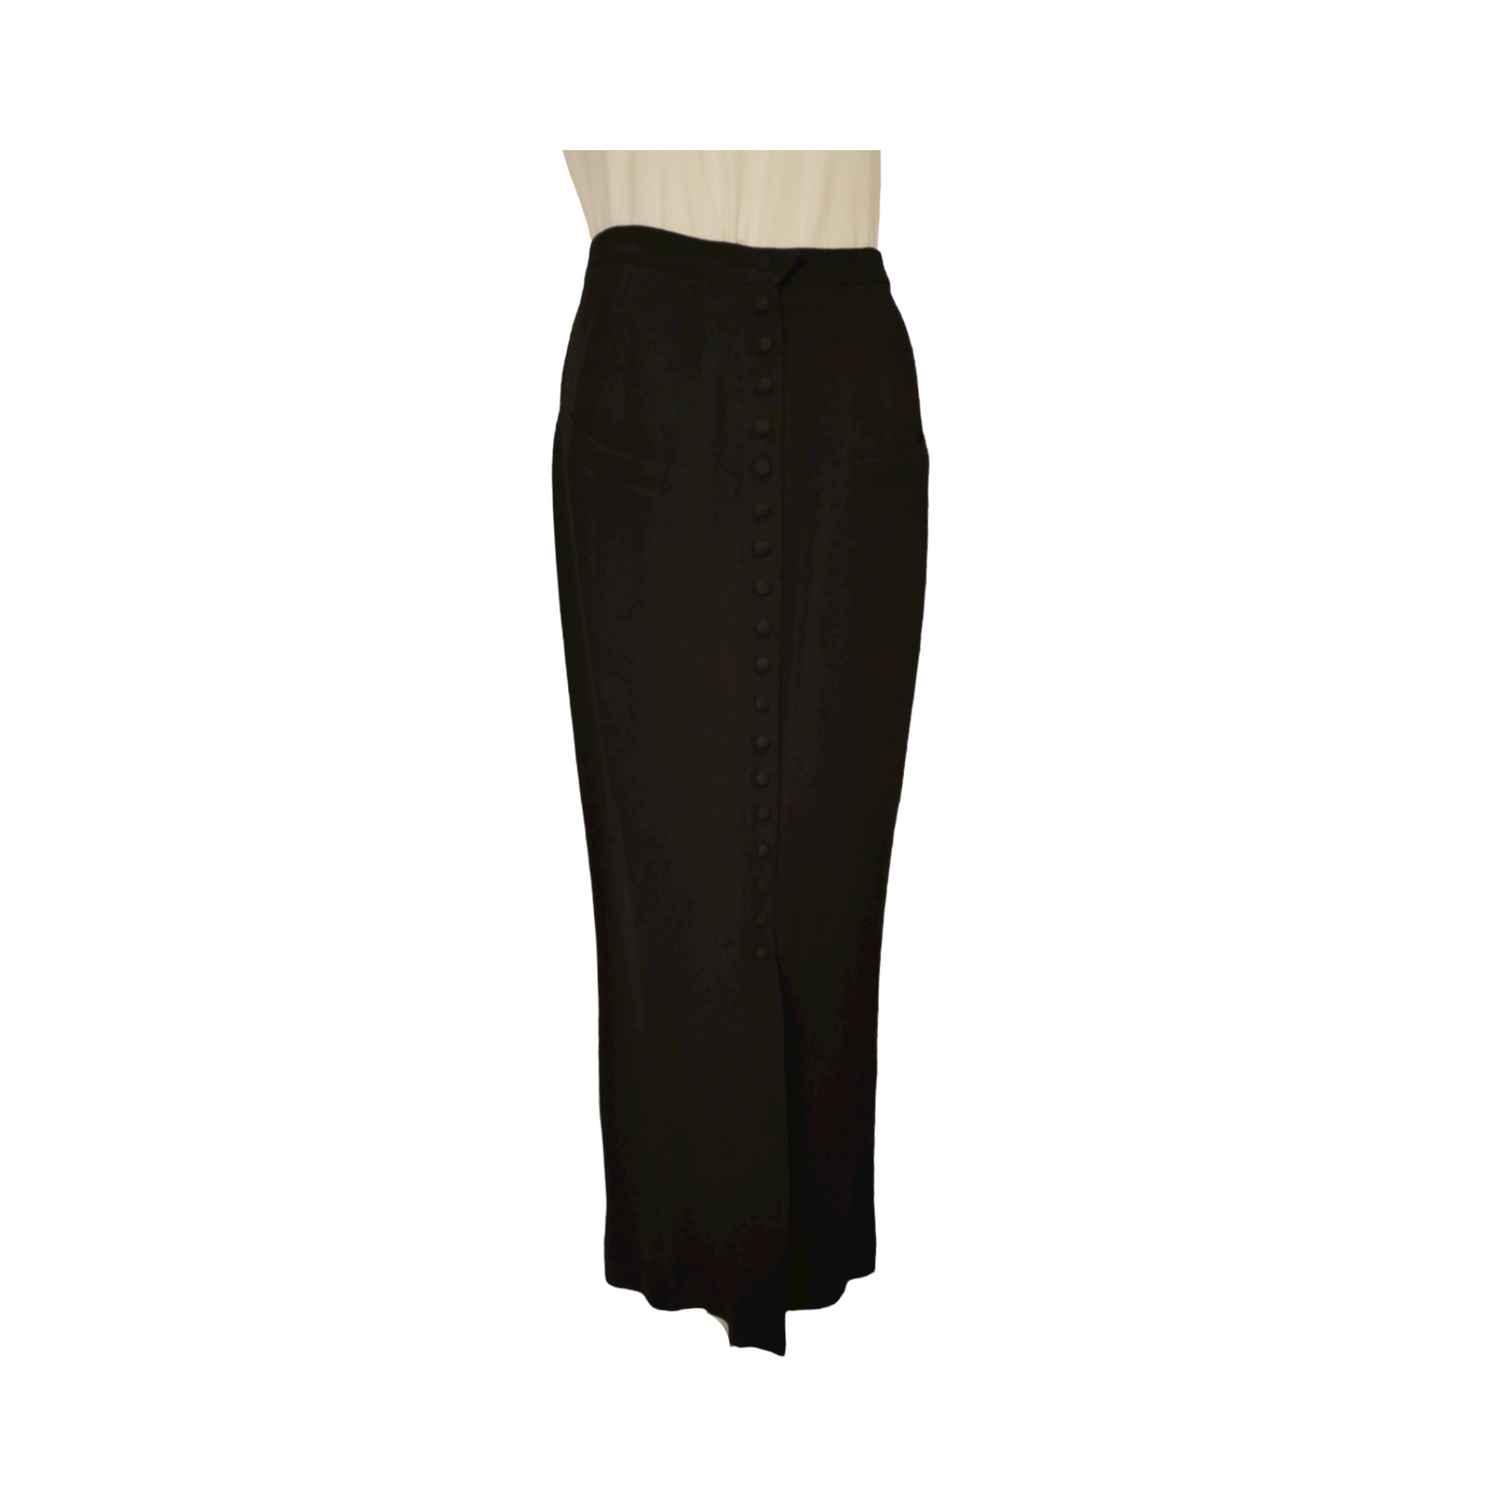 THIERRY MUGLER Skirts vintage Lysis Paris pre-owned secondhand